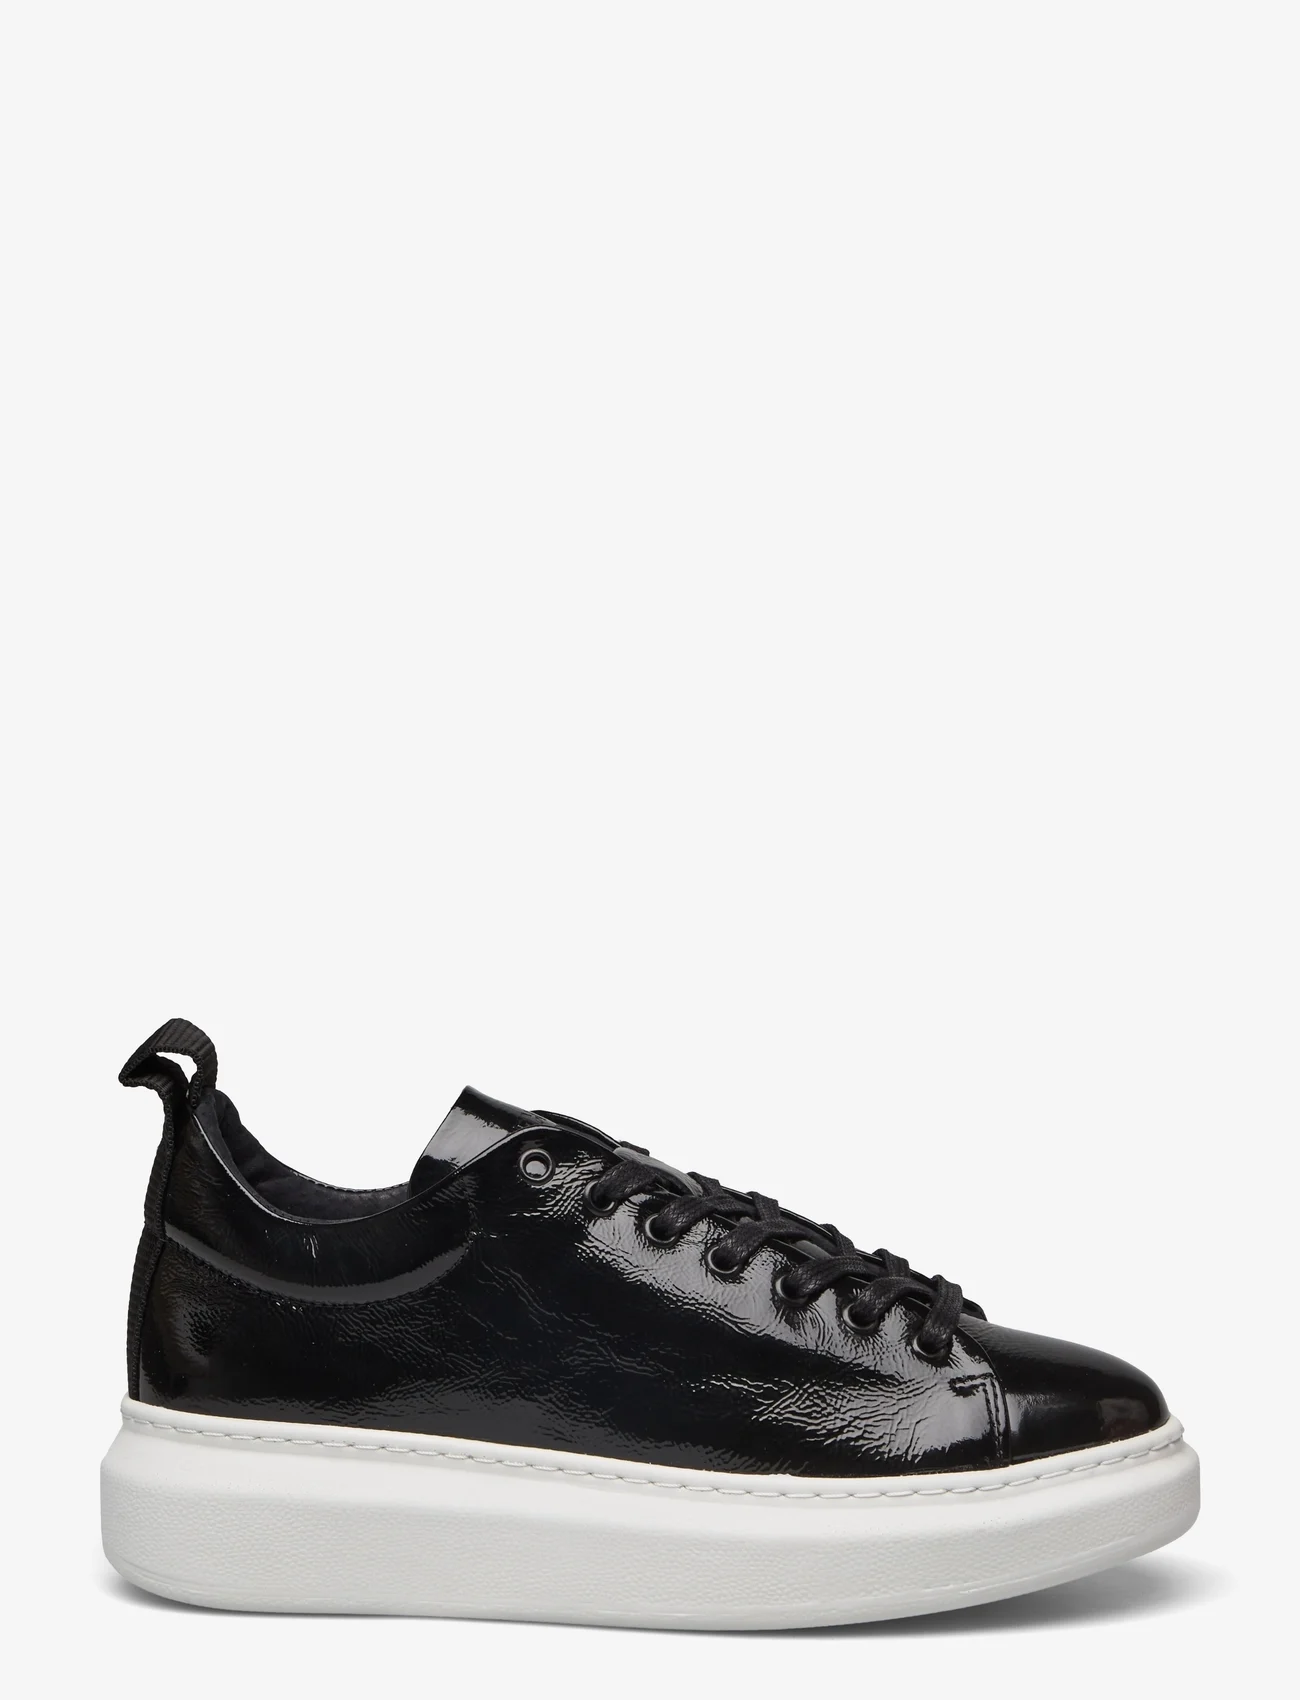 Pavement - Dee patent - low top sneakers - black patent - 1